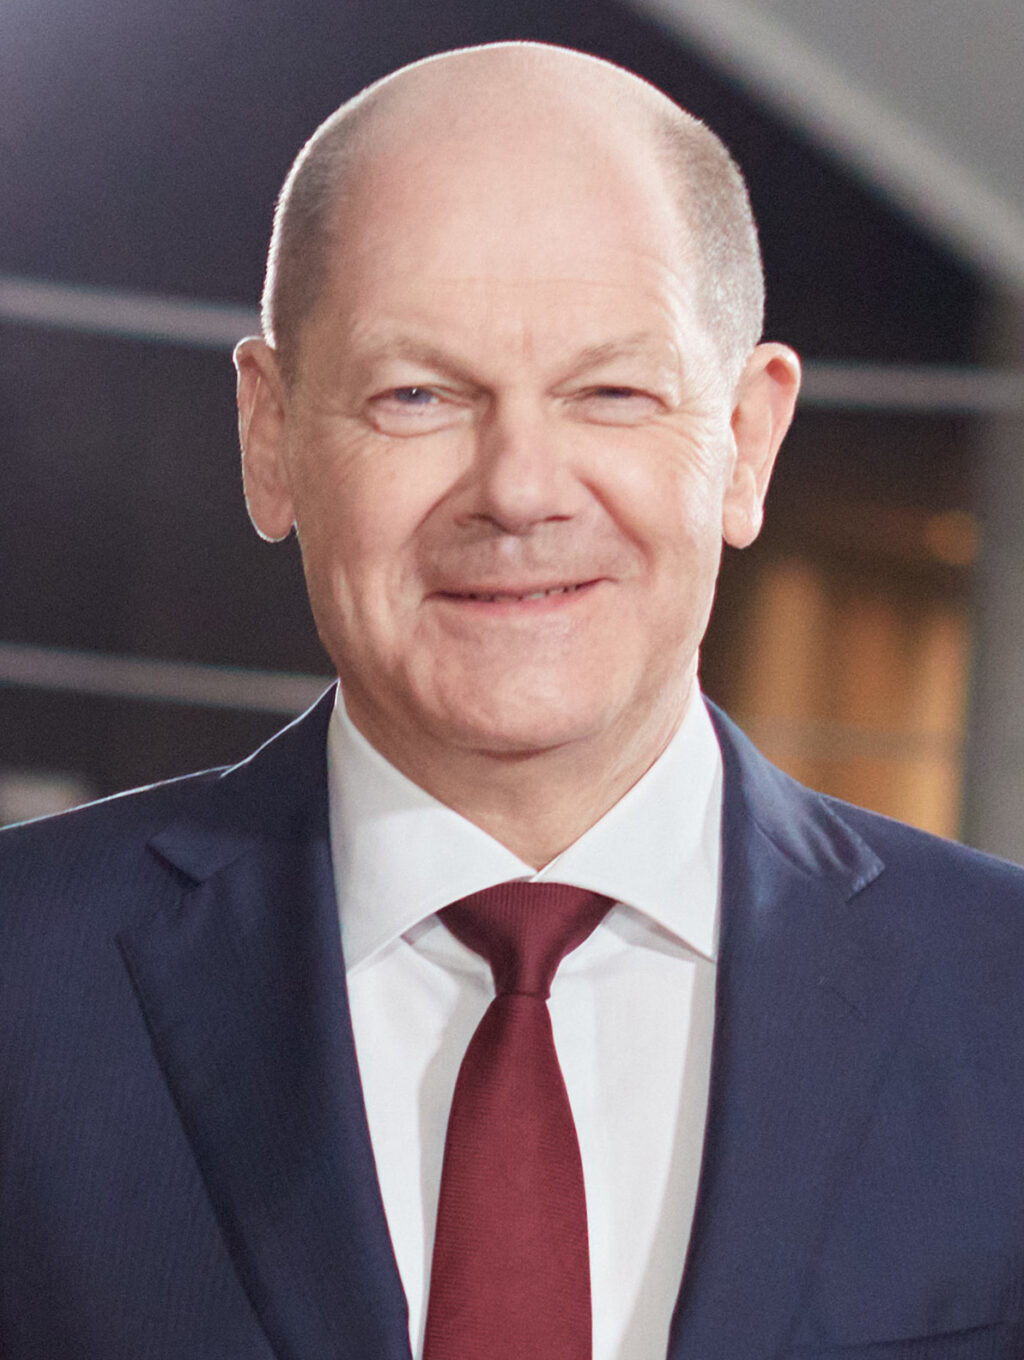 Le chancelier allemand Olaf Scholz ©Wikimedia Commons